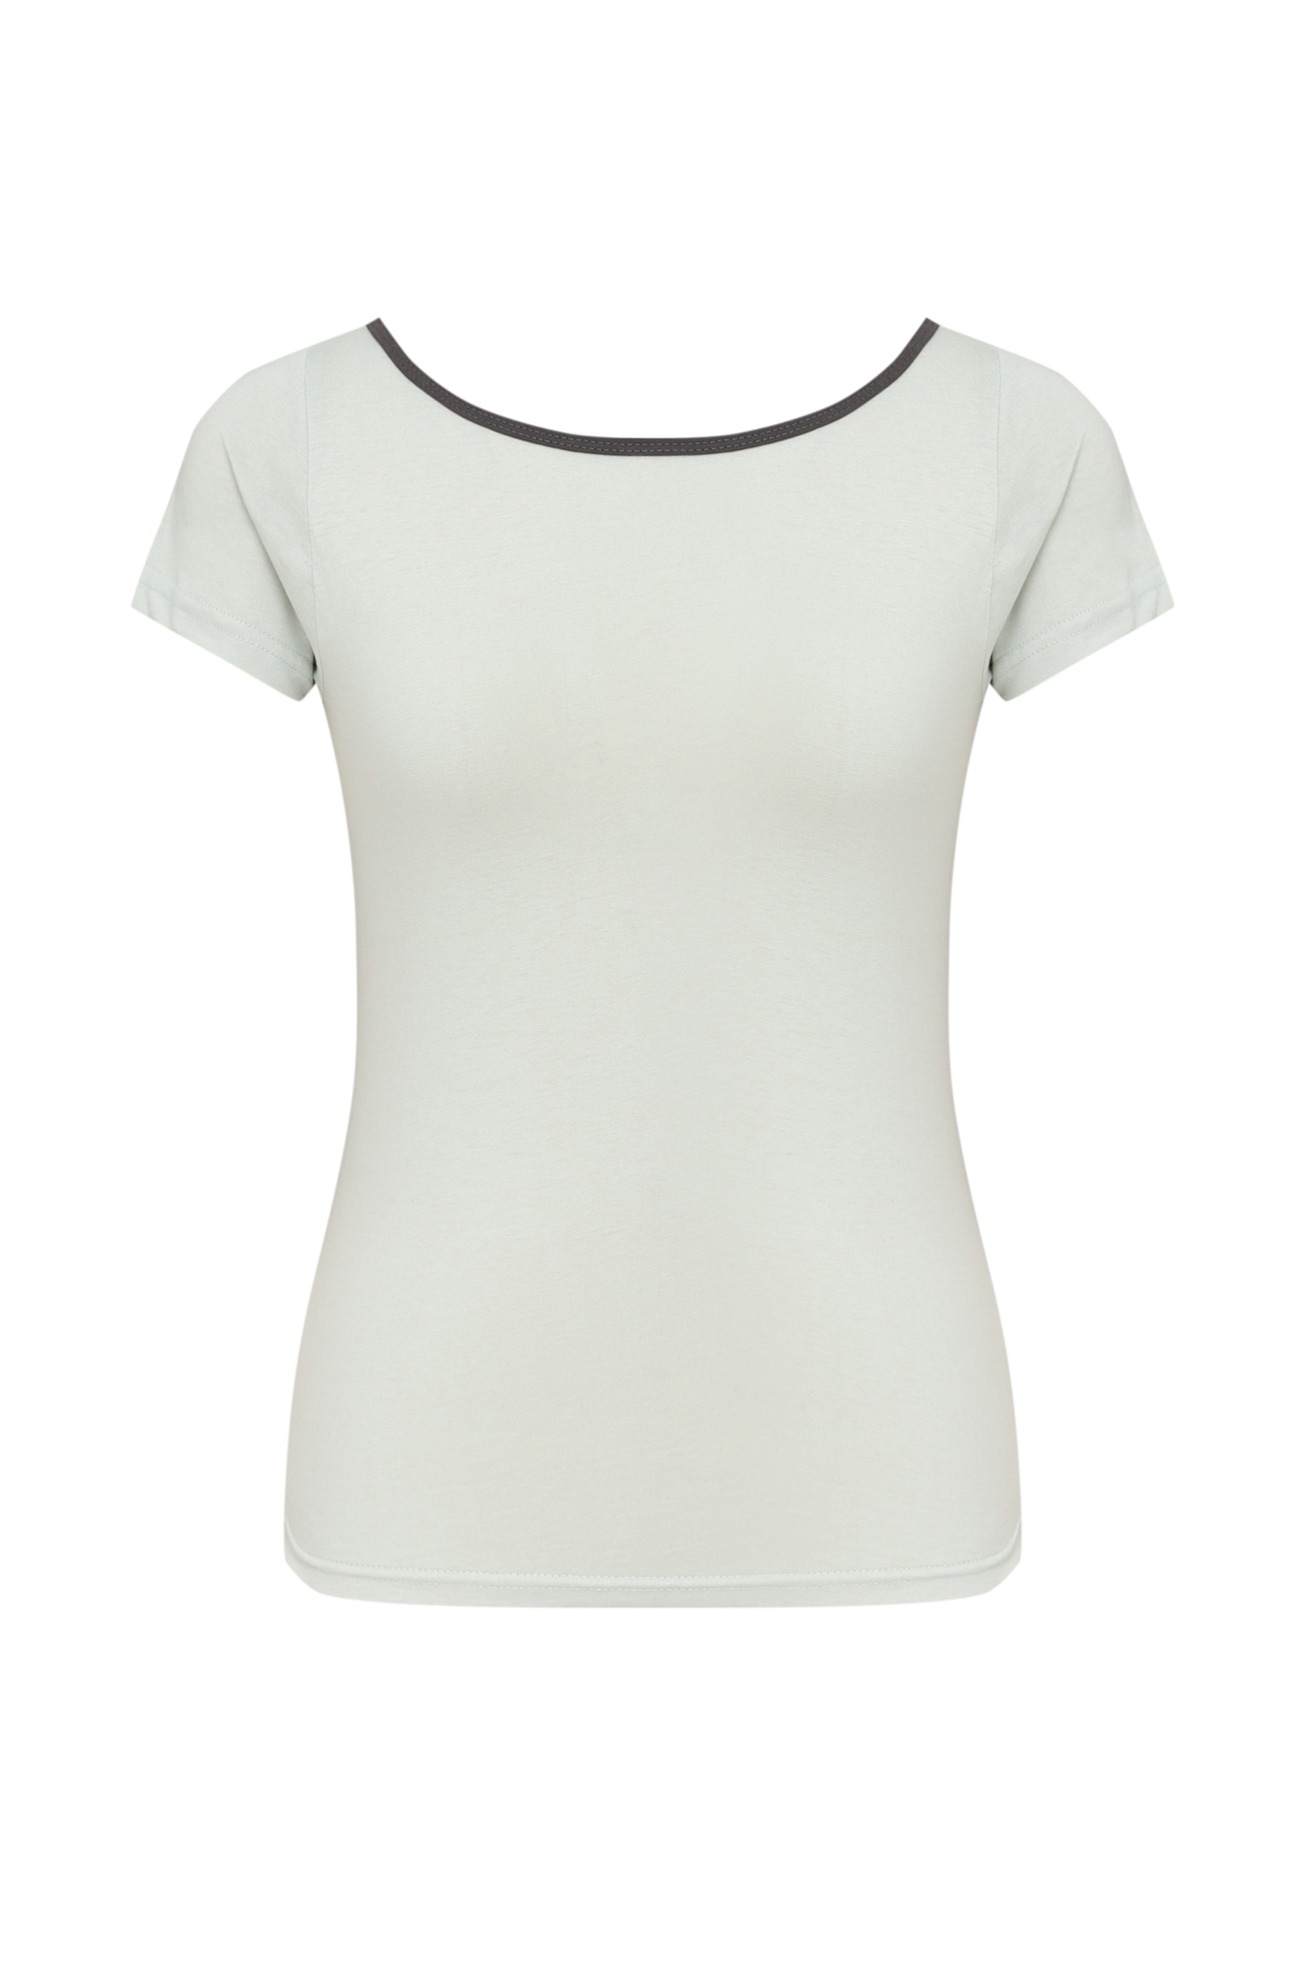 Two Tone Boat Neck Tee